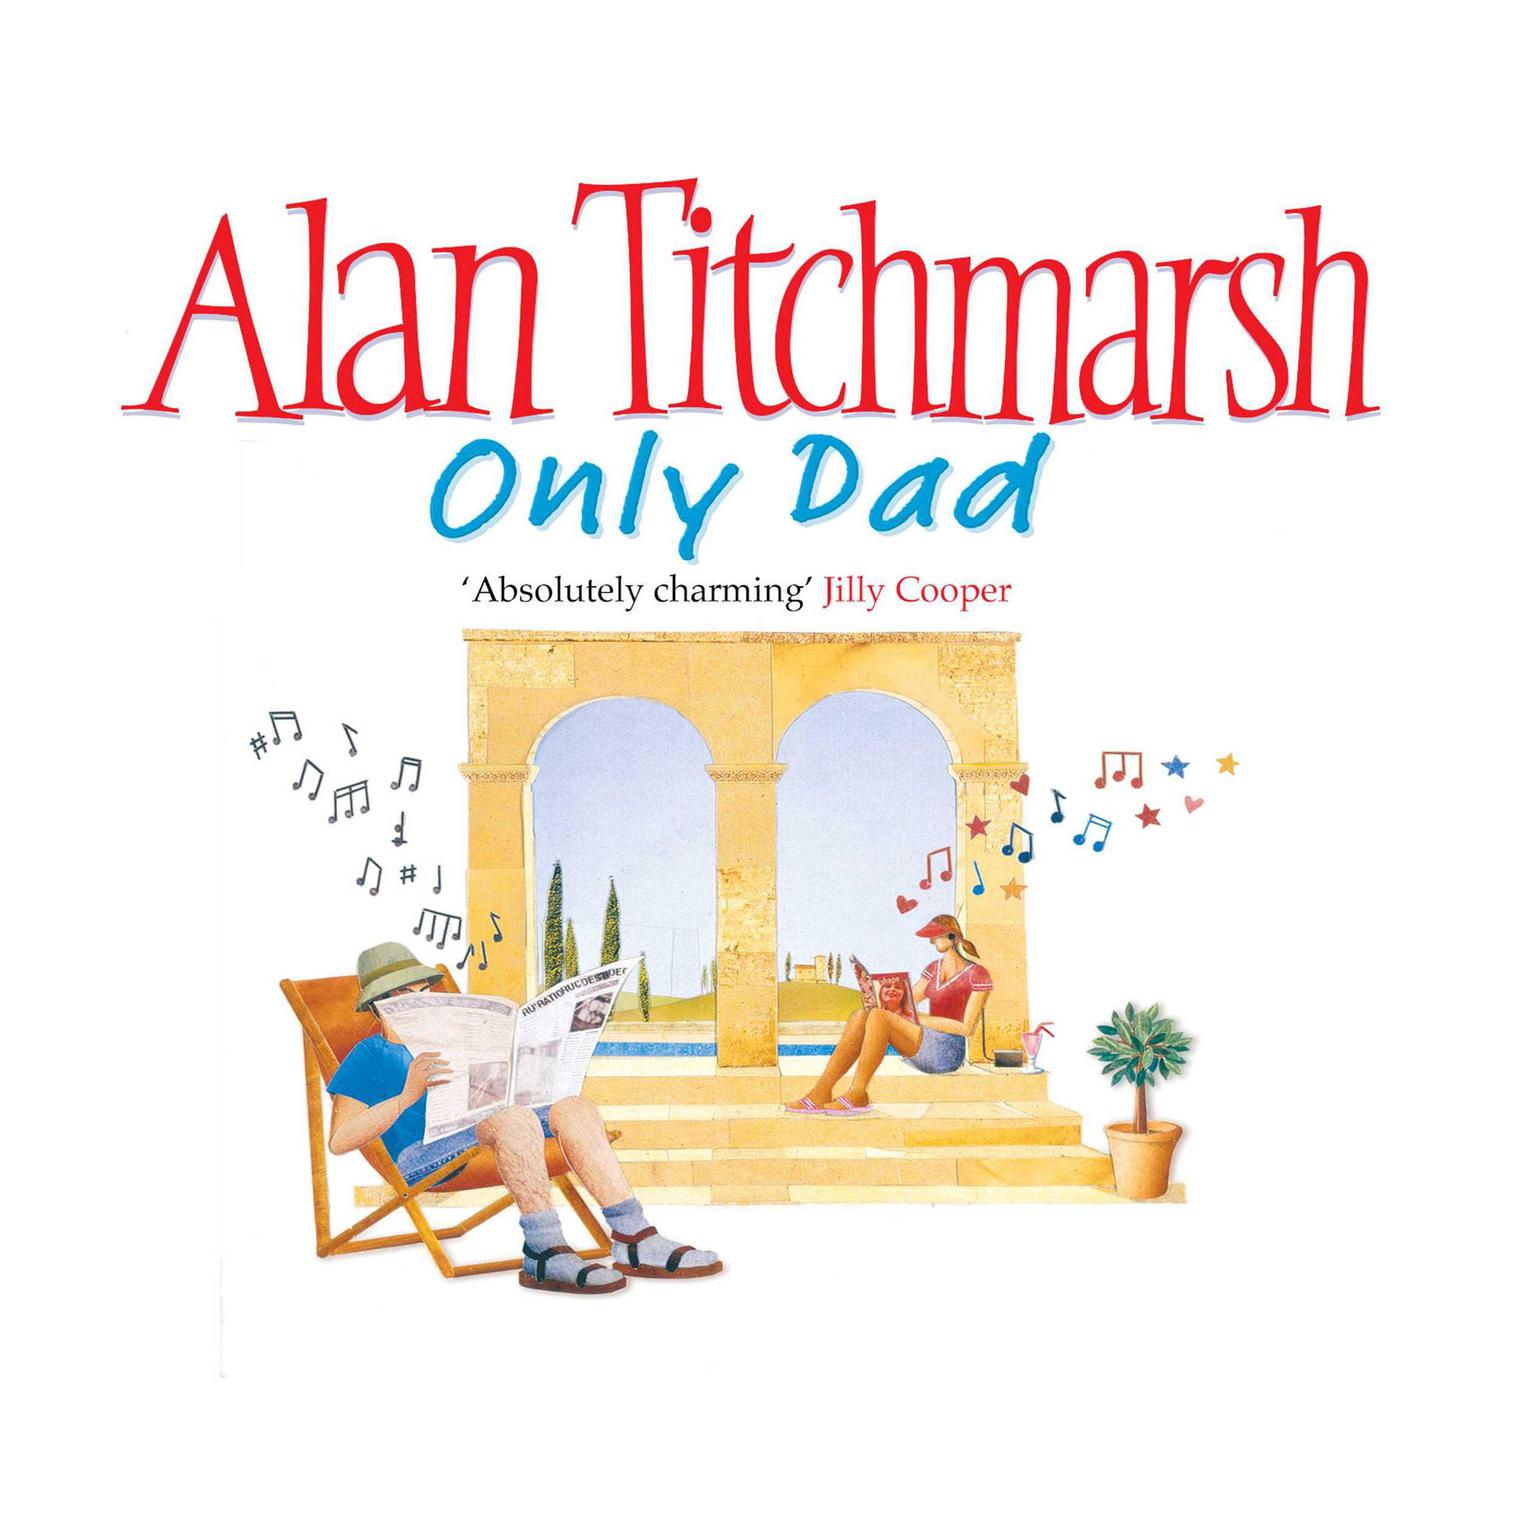 Only Dad (Abridged) Audiobook, by Alan Titchmarsh